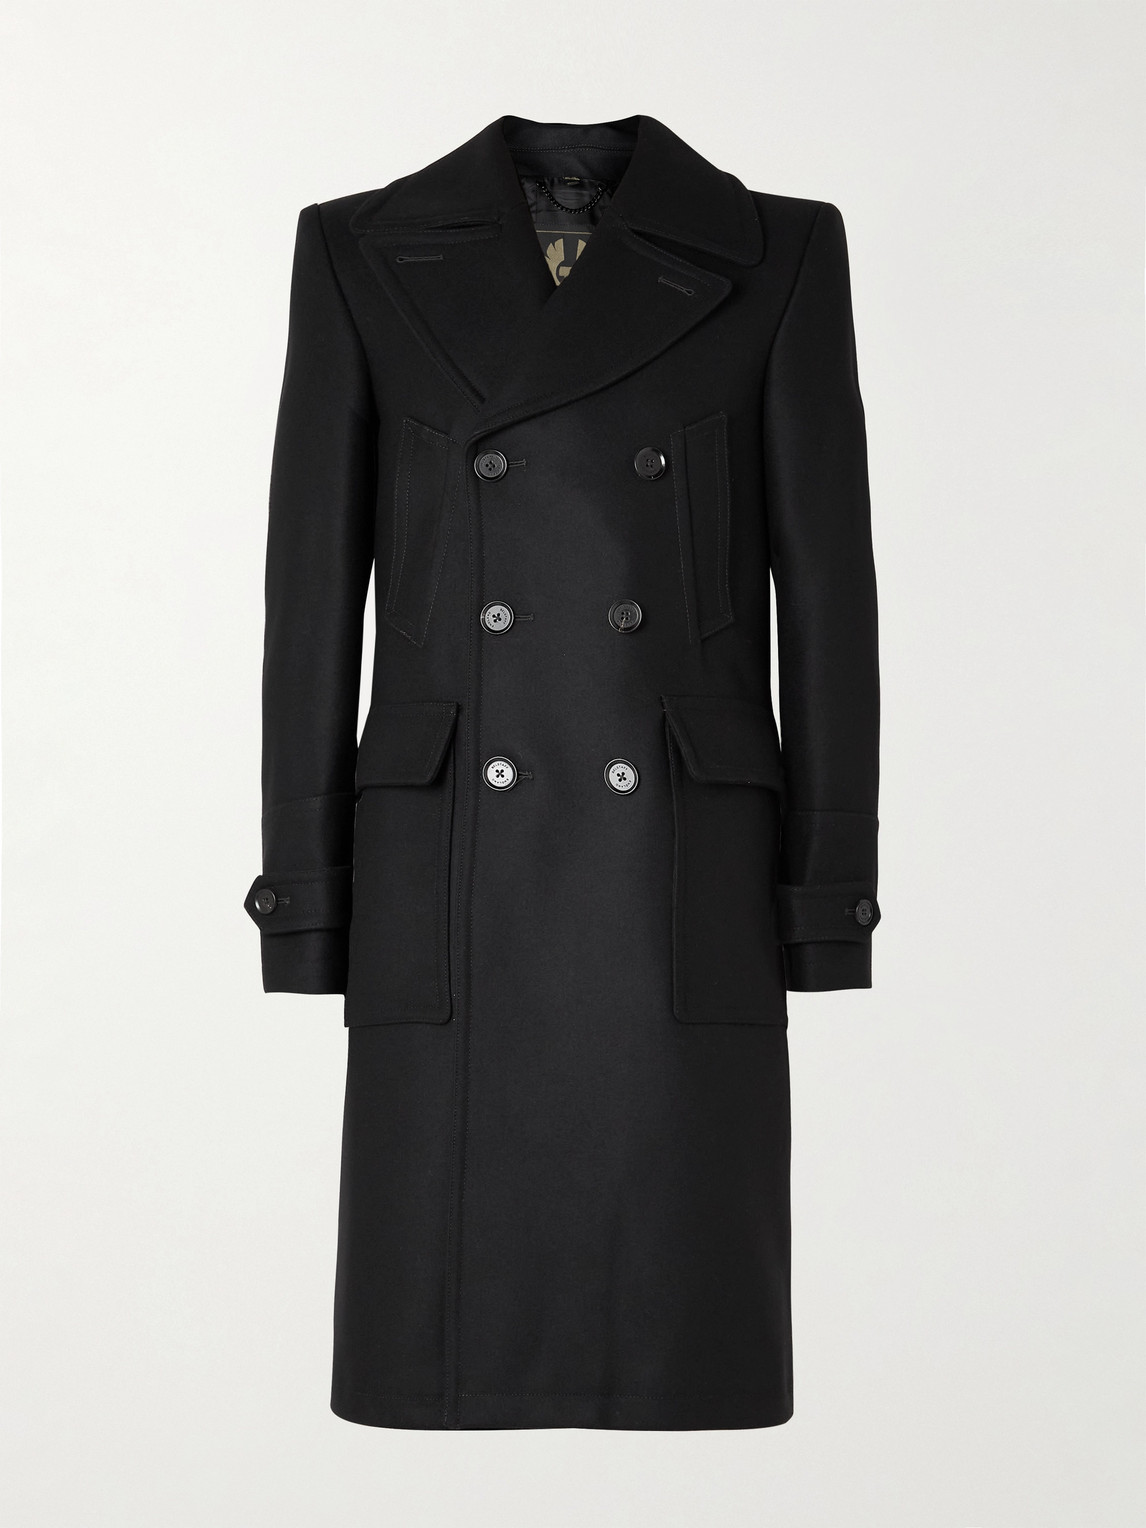 BELSTAFF MILFORD DOUBLE-BREASTED WOOL-BLEND COAT